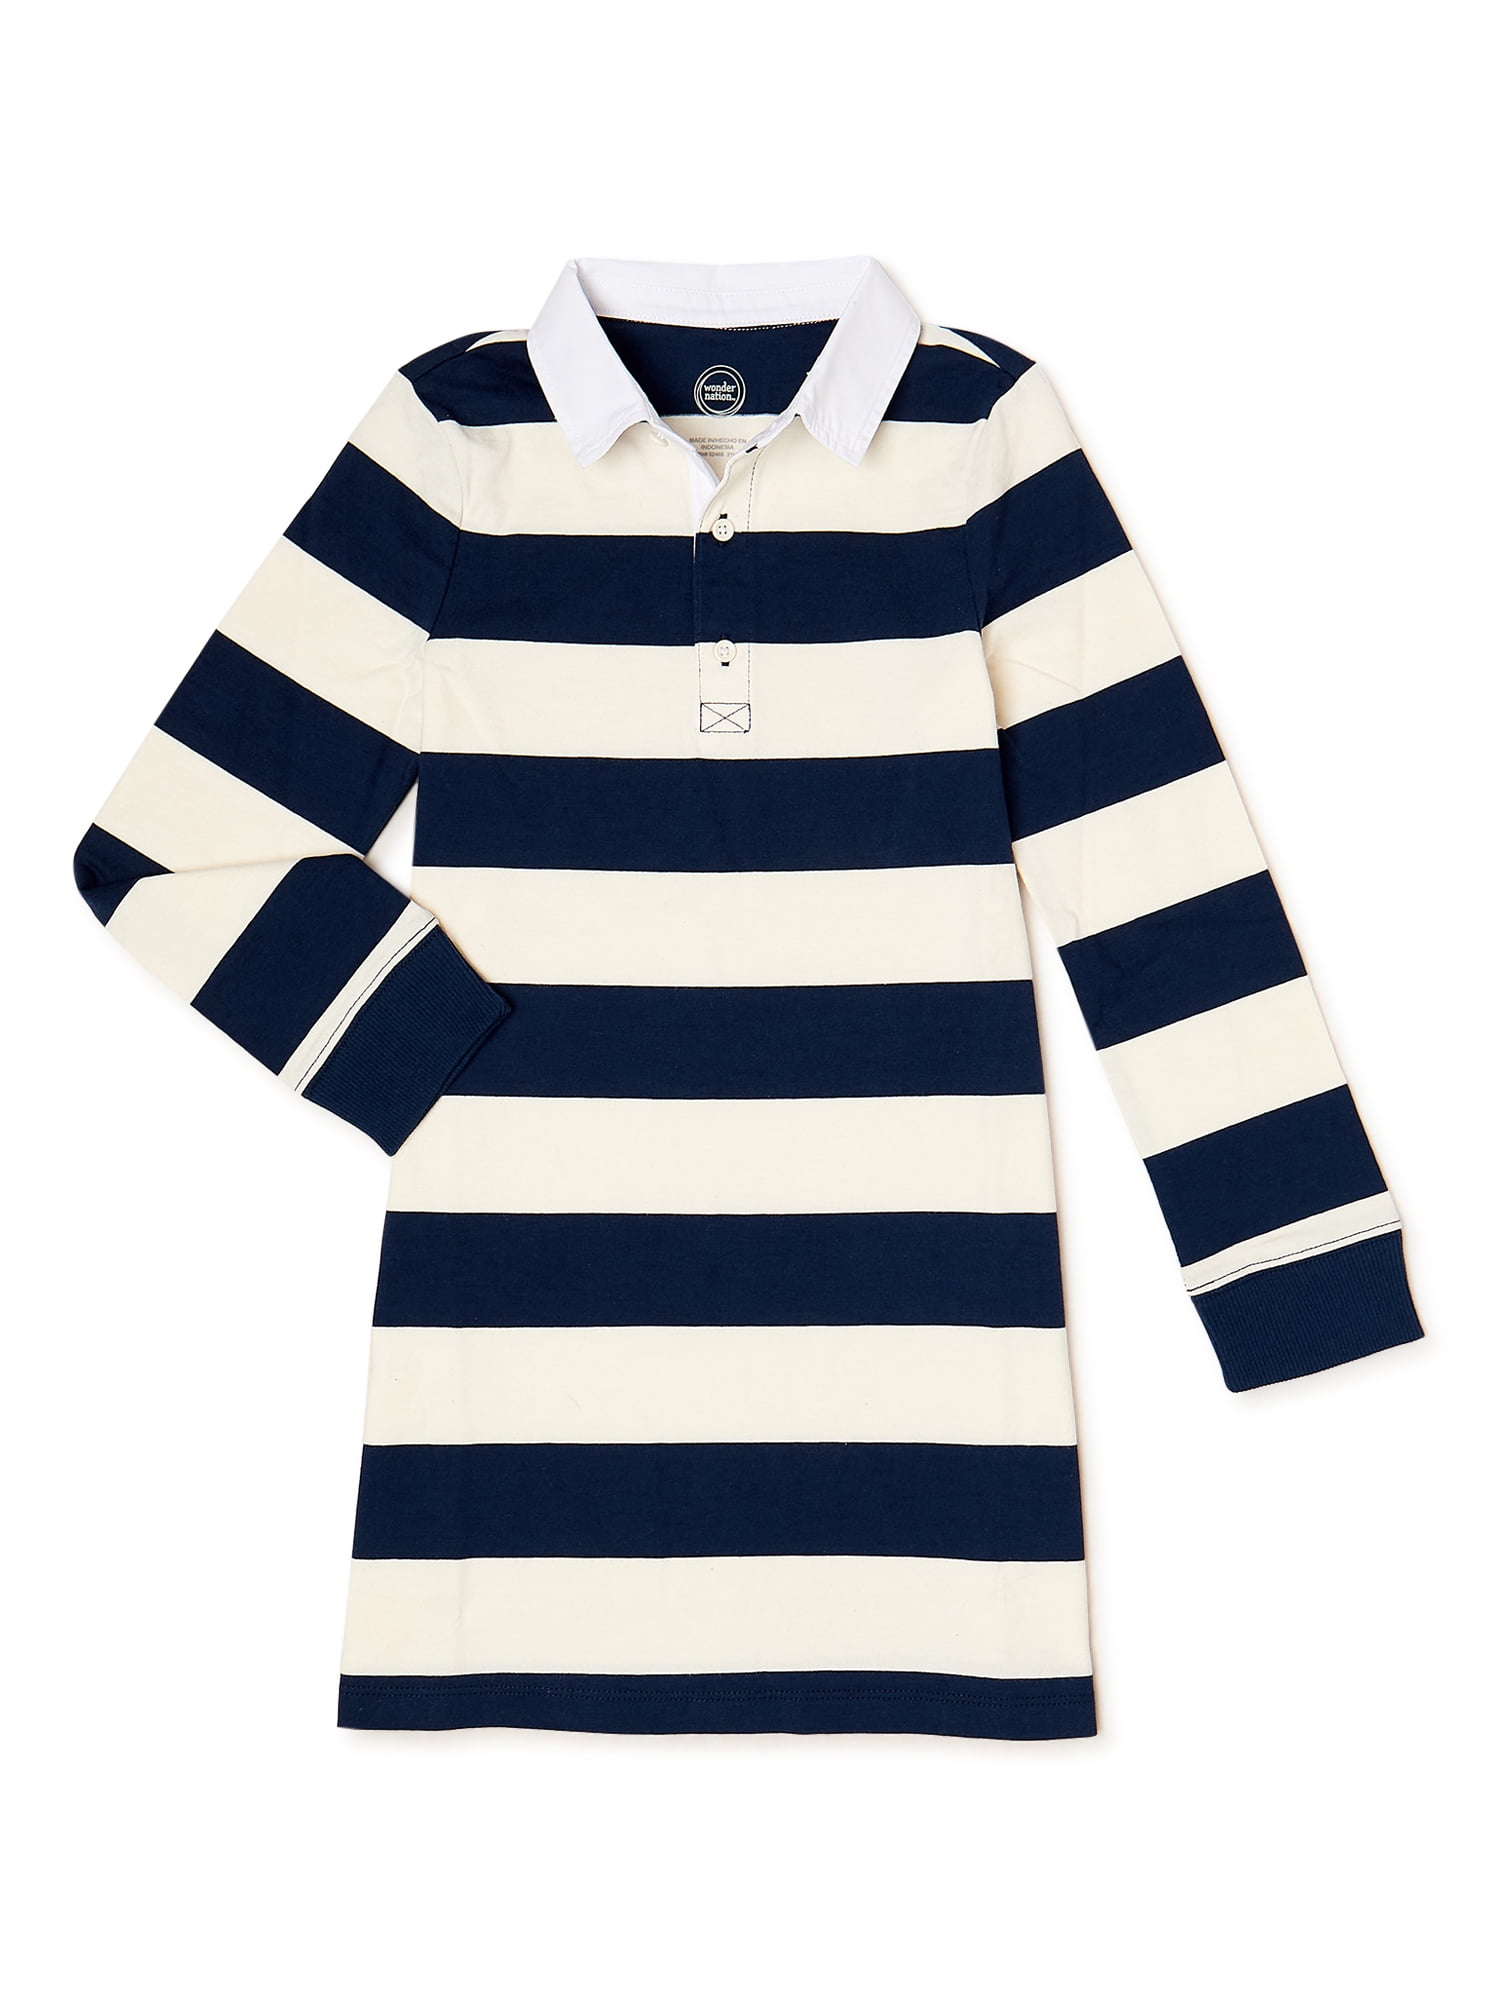 Wonder Nation Girls’ Rugby Dress with Long Sleeves, Sizes 4-18 & Plus